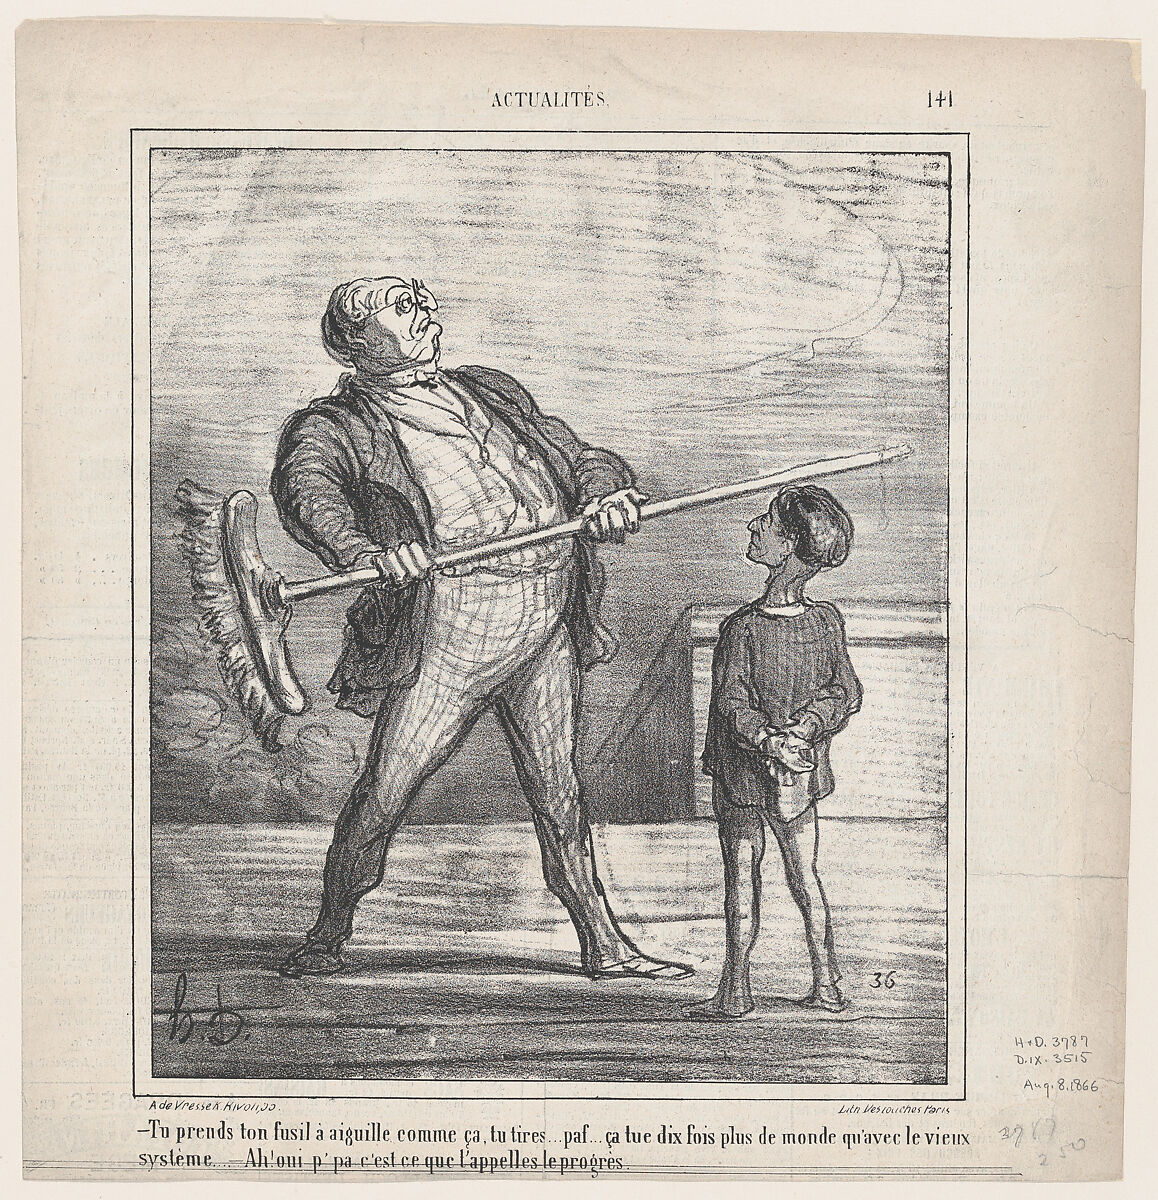 –You take your pin-gun in your hand like this.... you fire... puff... this kills ten times more people than the old system... –Ah, yes papa, this is what one calls progress, from 'News of the day,' published in Le Charivari, August 8, 1866, Honoré Daumier (French, Marseilles 1808–1879 Valmondois), Lithograph on newsprint 